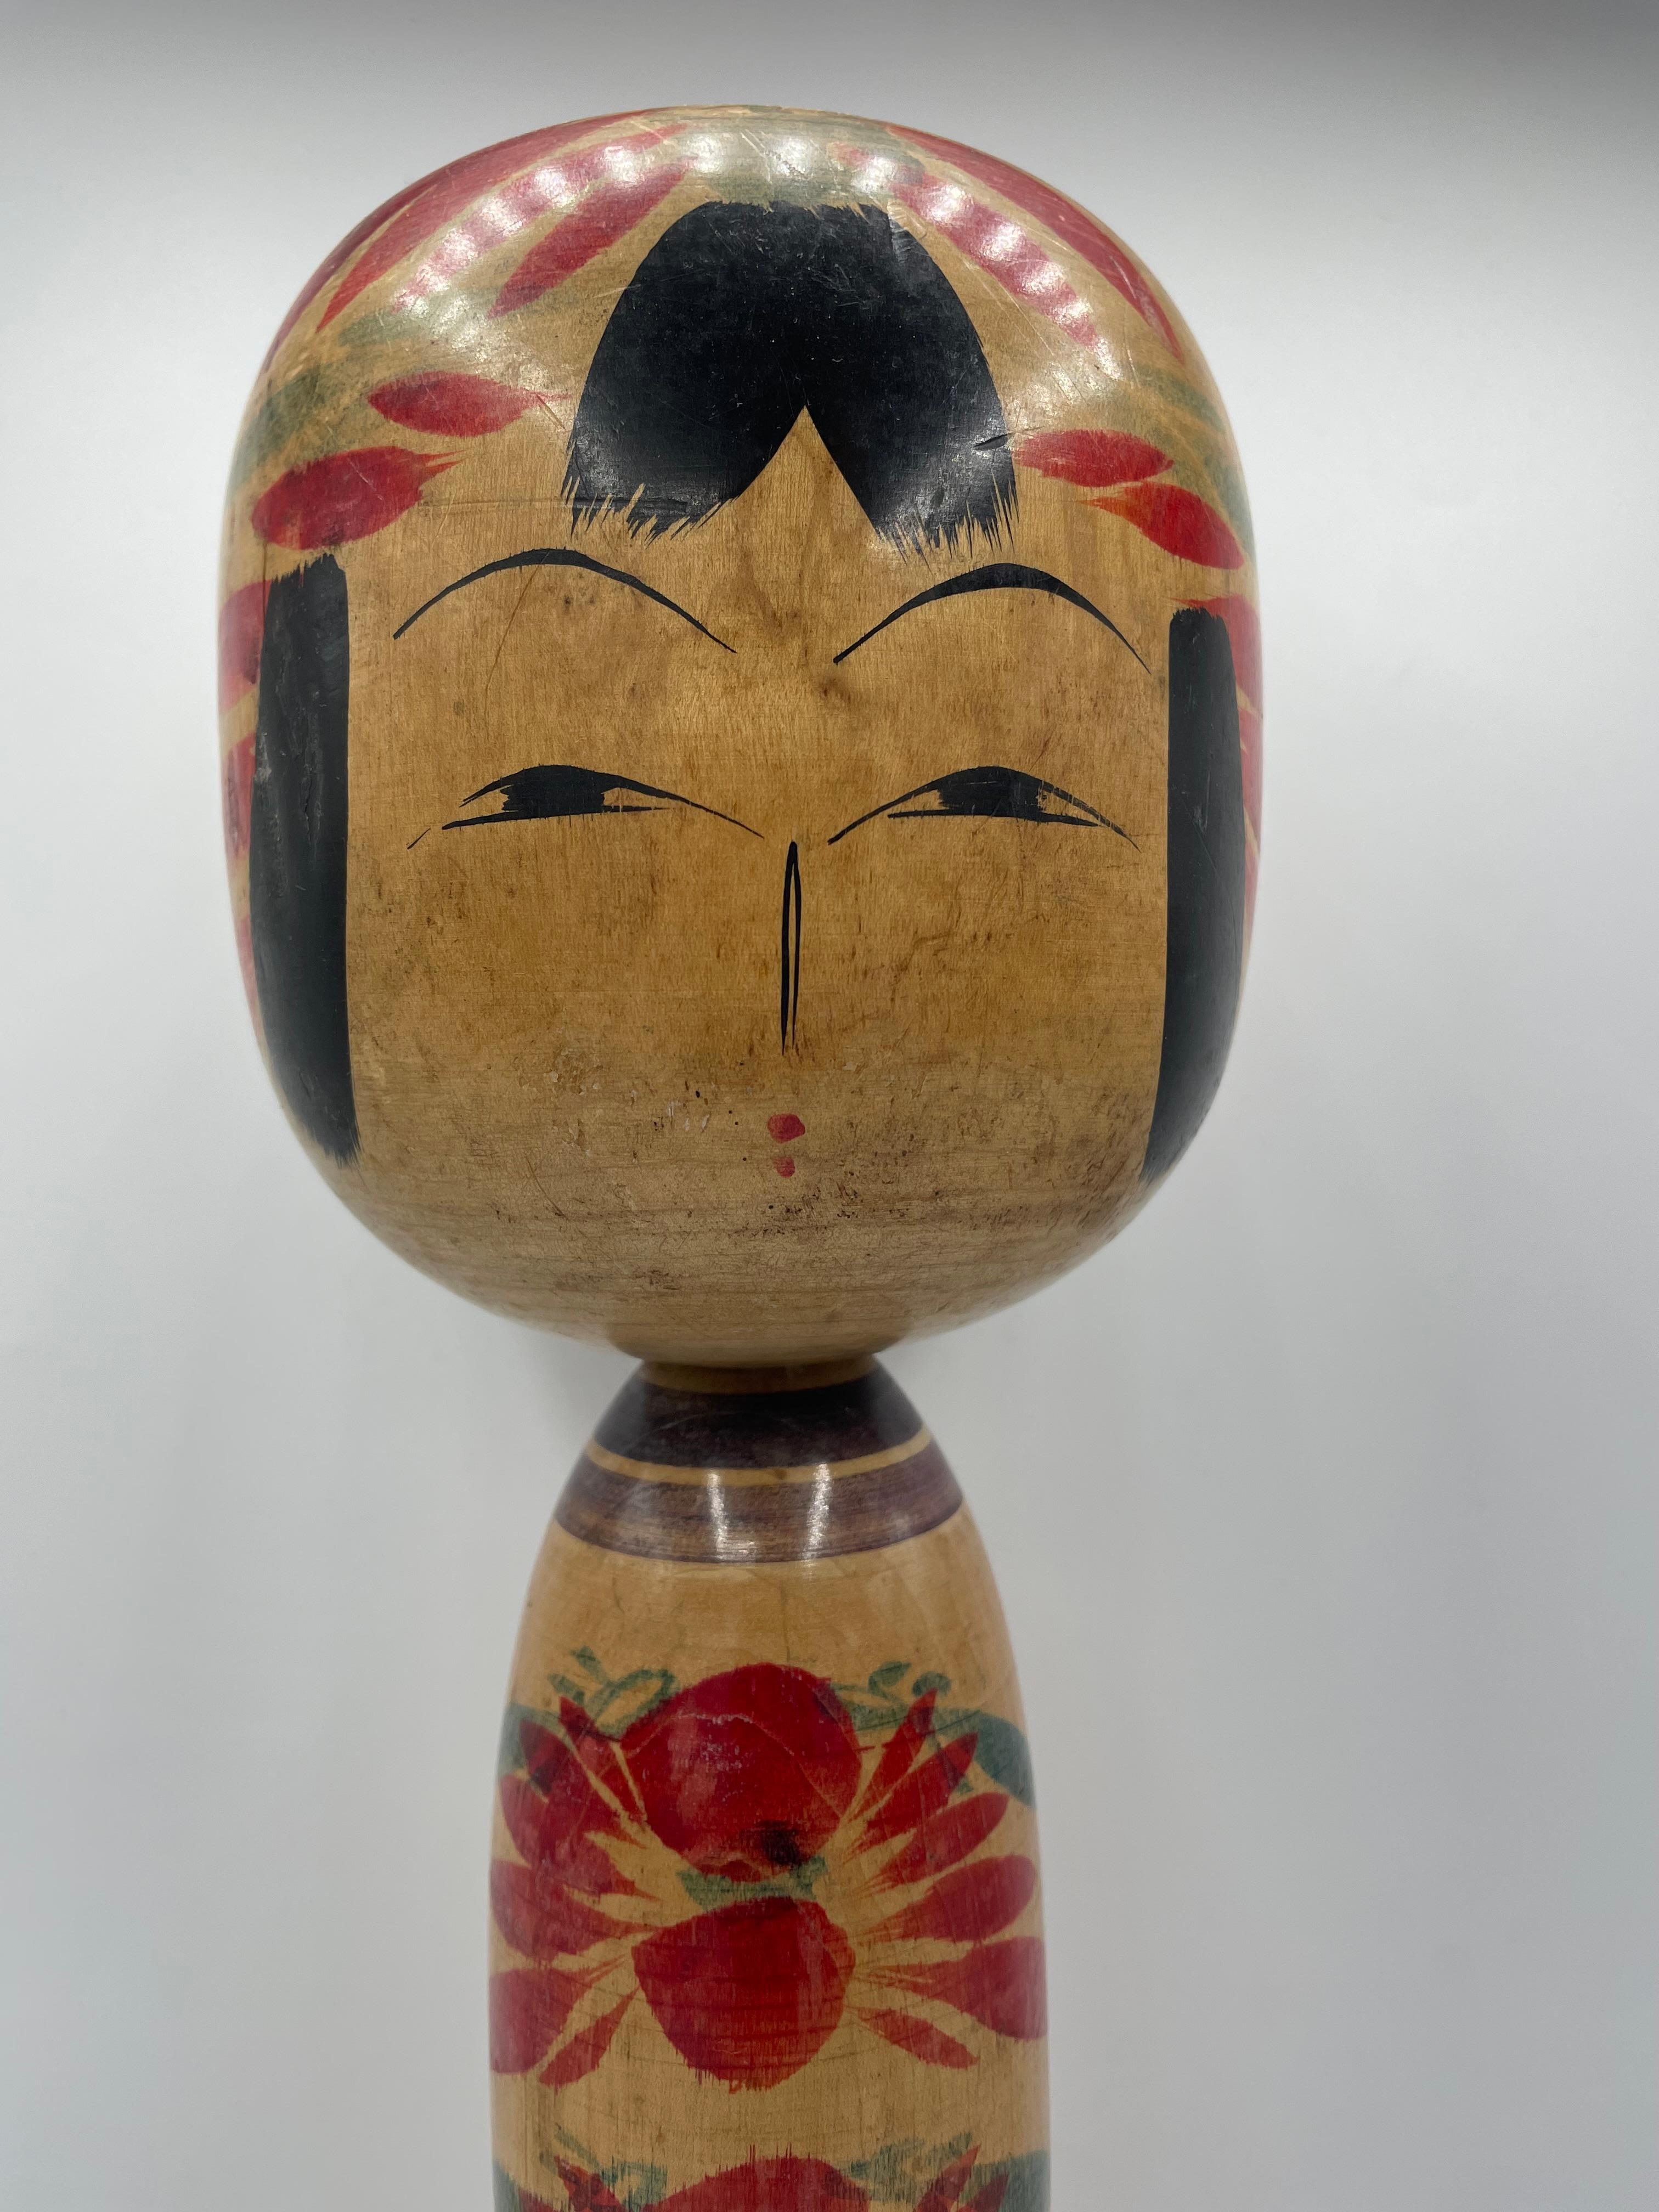 This is a wooden doll which is called Kokeshi in Japanese.
This kokeshi was made in Japan around 1960s by kokeshi artist Shojiro SAKAI.
He was born in Sendai, Miyagi prefecture in 1st January 1921. His signature is written on the bottom of this